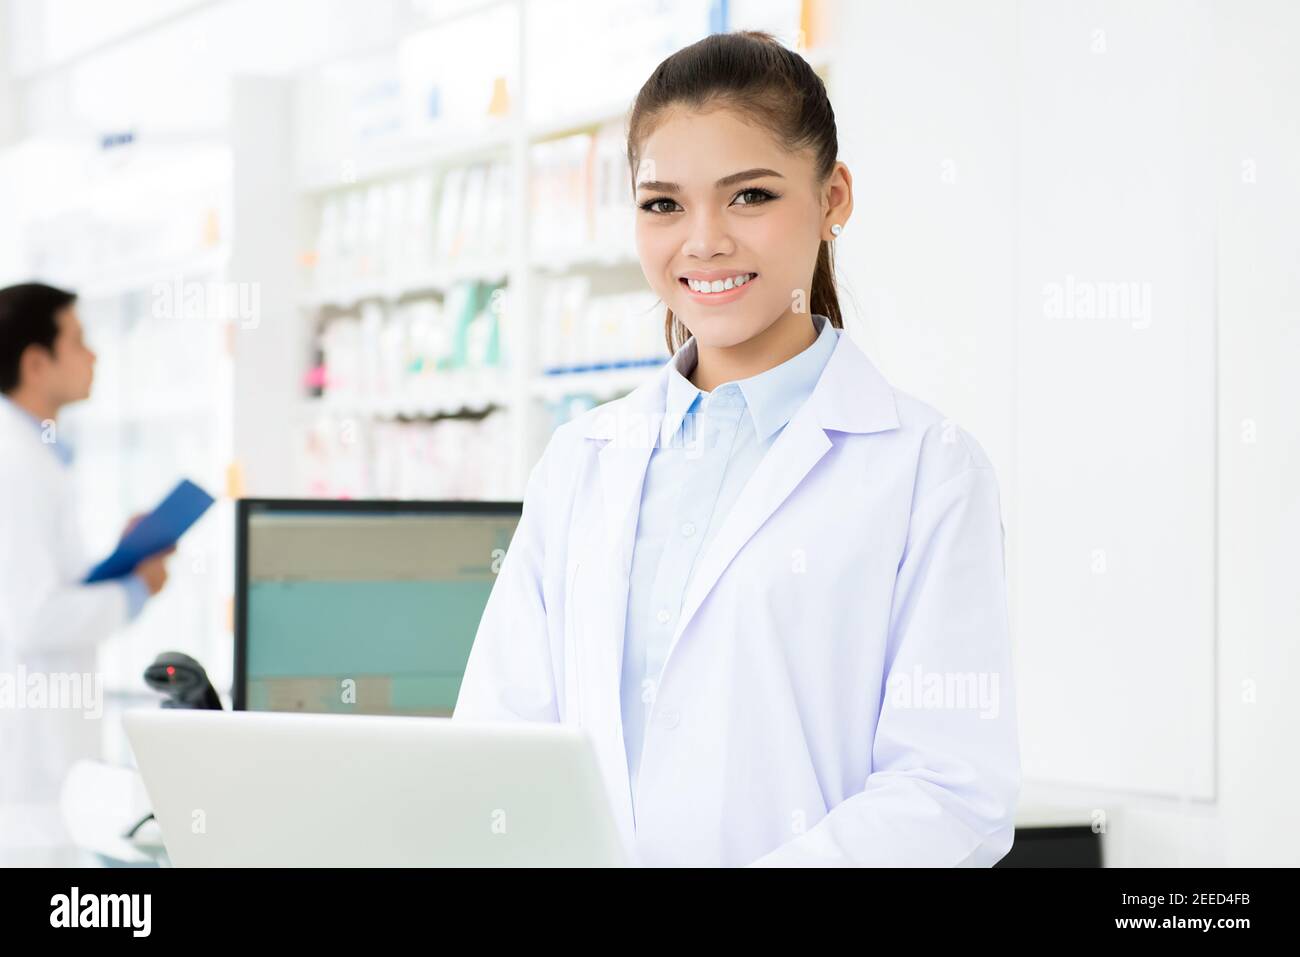 Young smiling Asian woman pharmacist in white gown coat uniform working on laptop computer in chemist shop or pharmacy Stock Photo